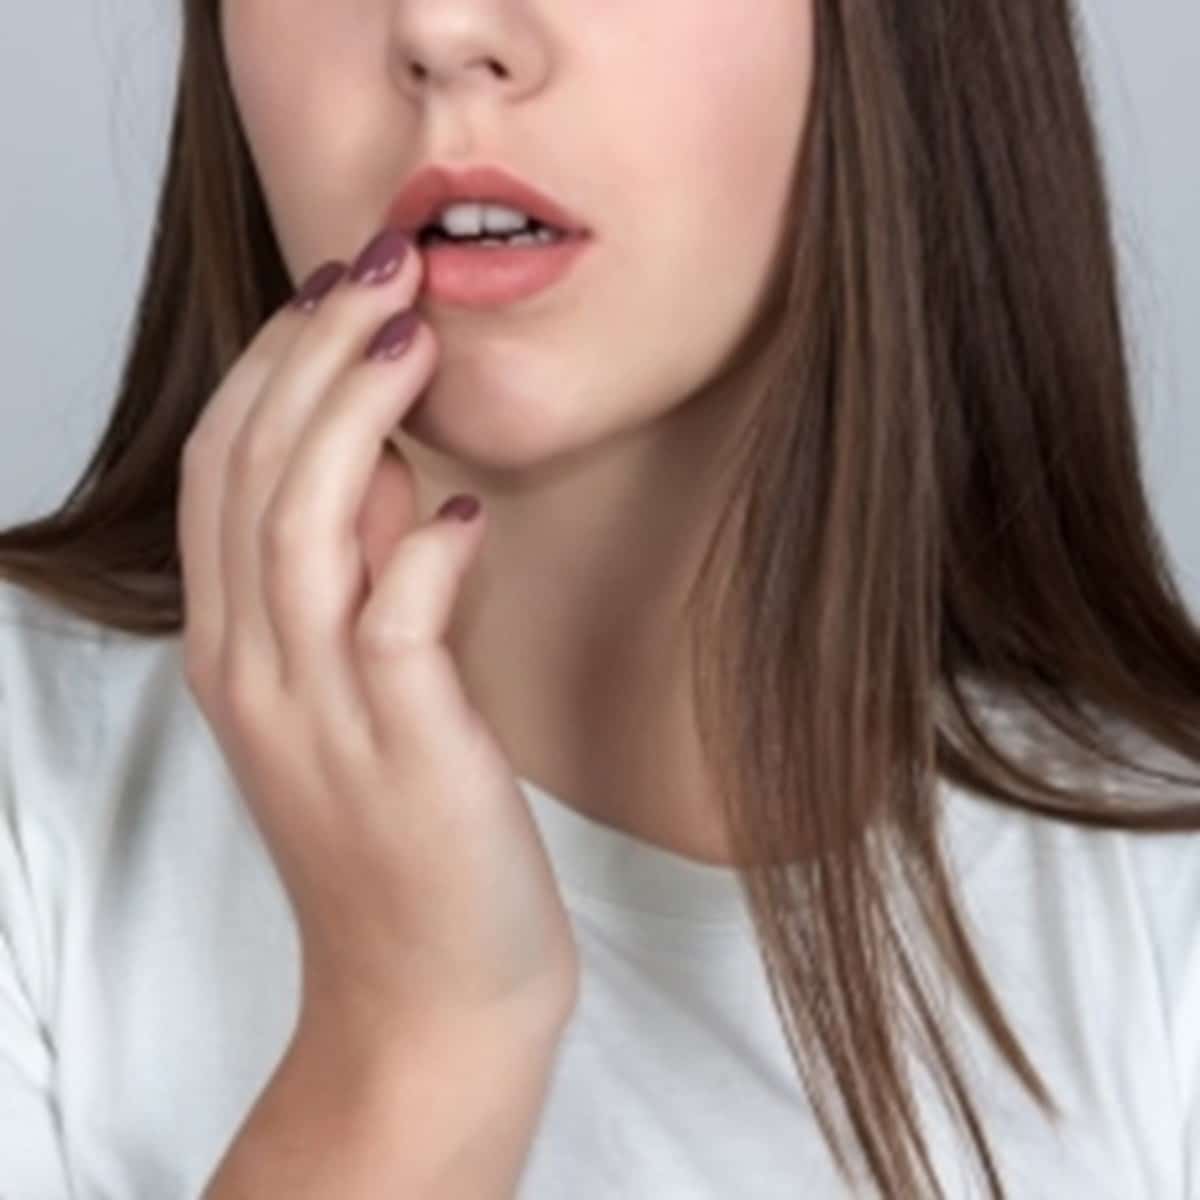 How to Get Rid of your Herpes Cold Sores on Lips Fast